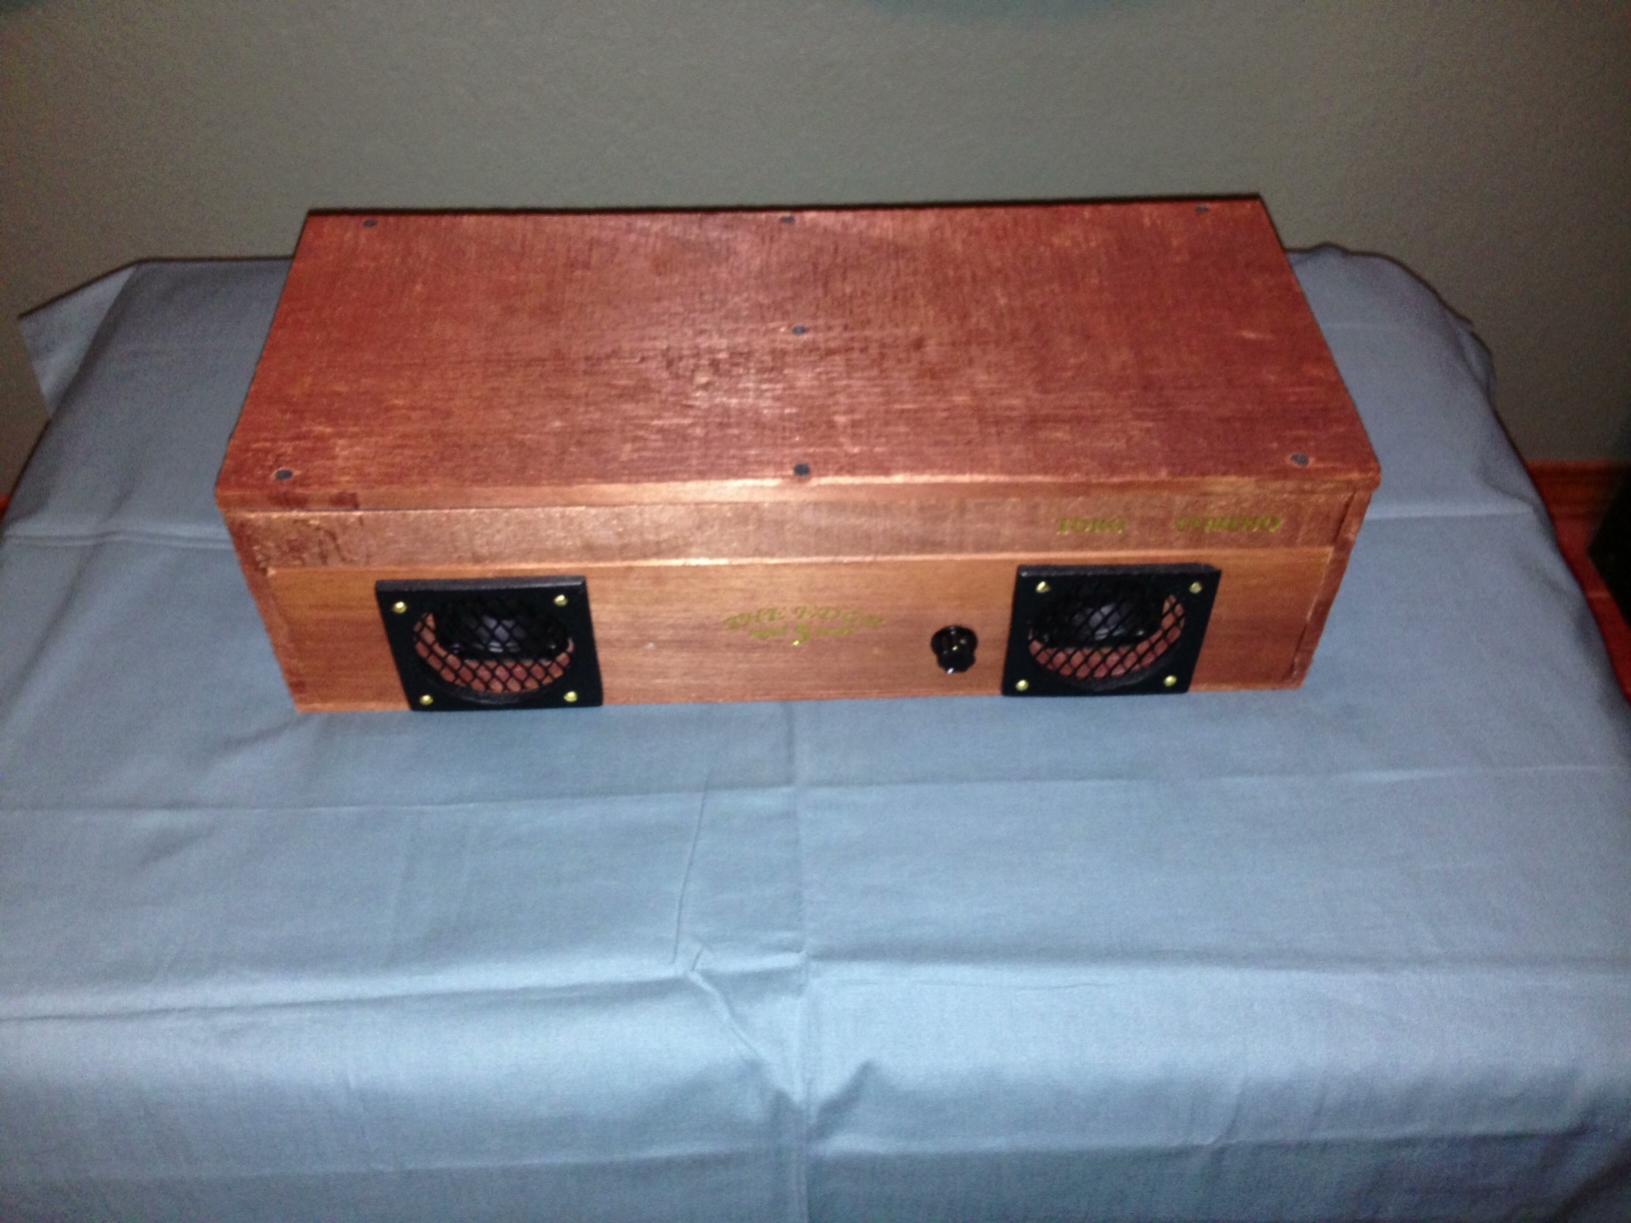 A basic boombox that will really rock.